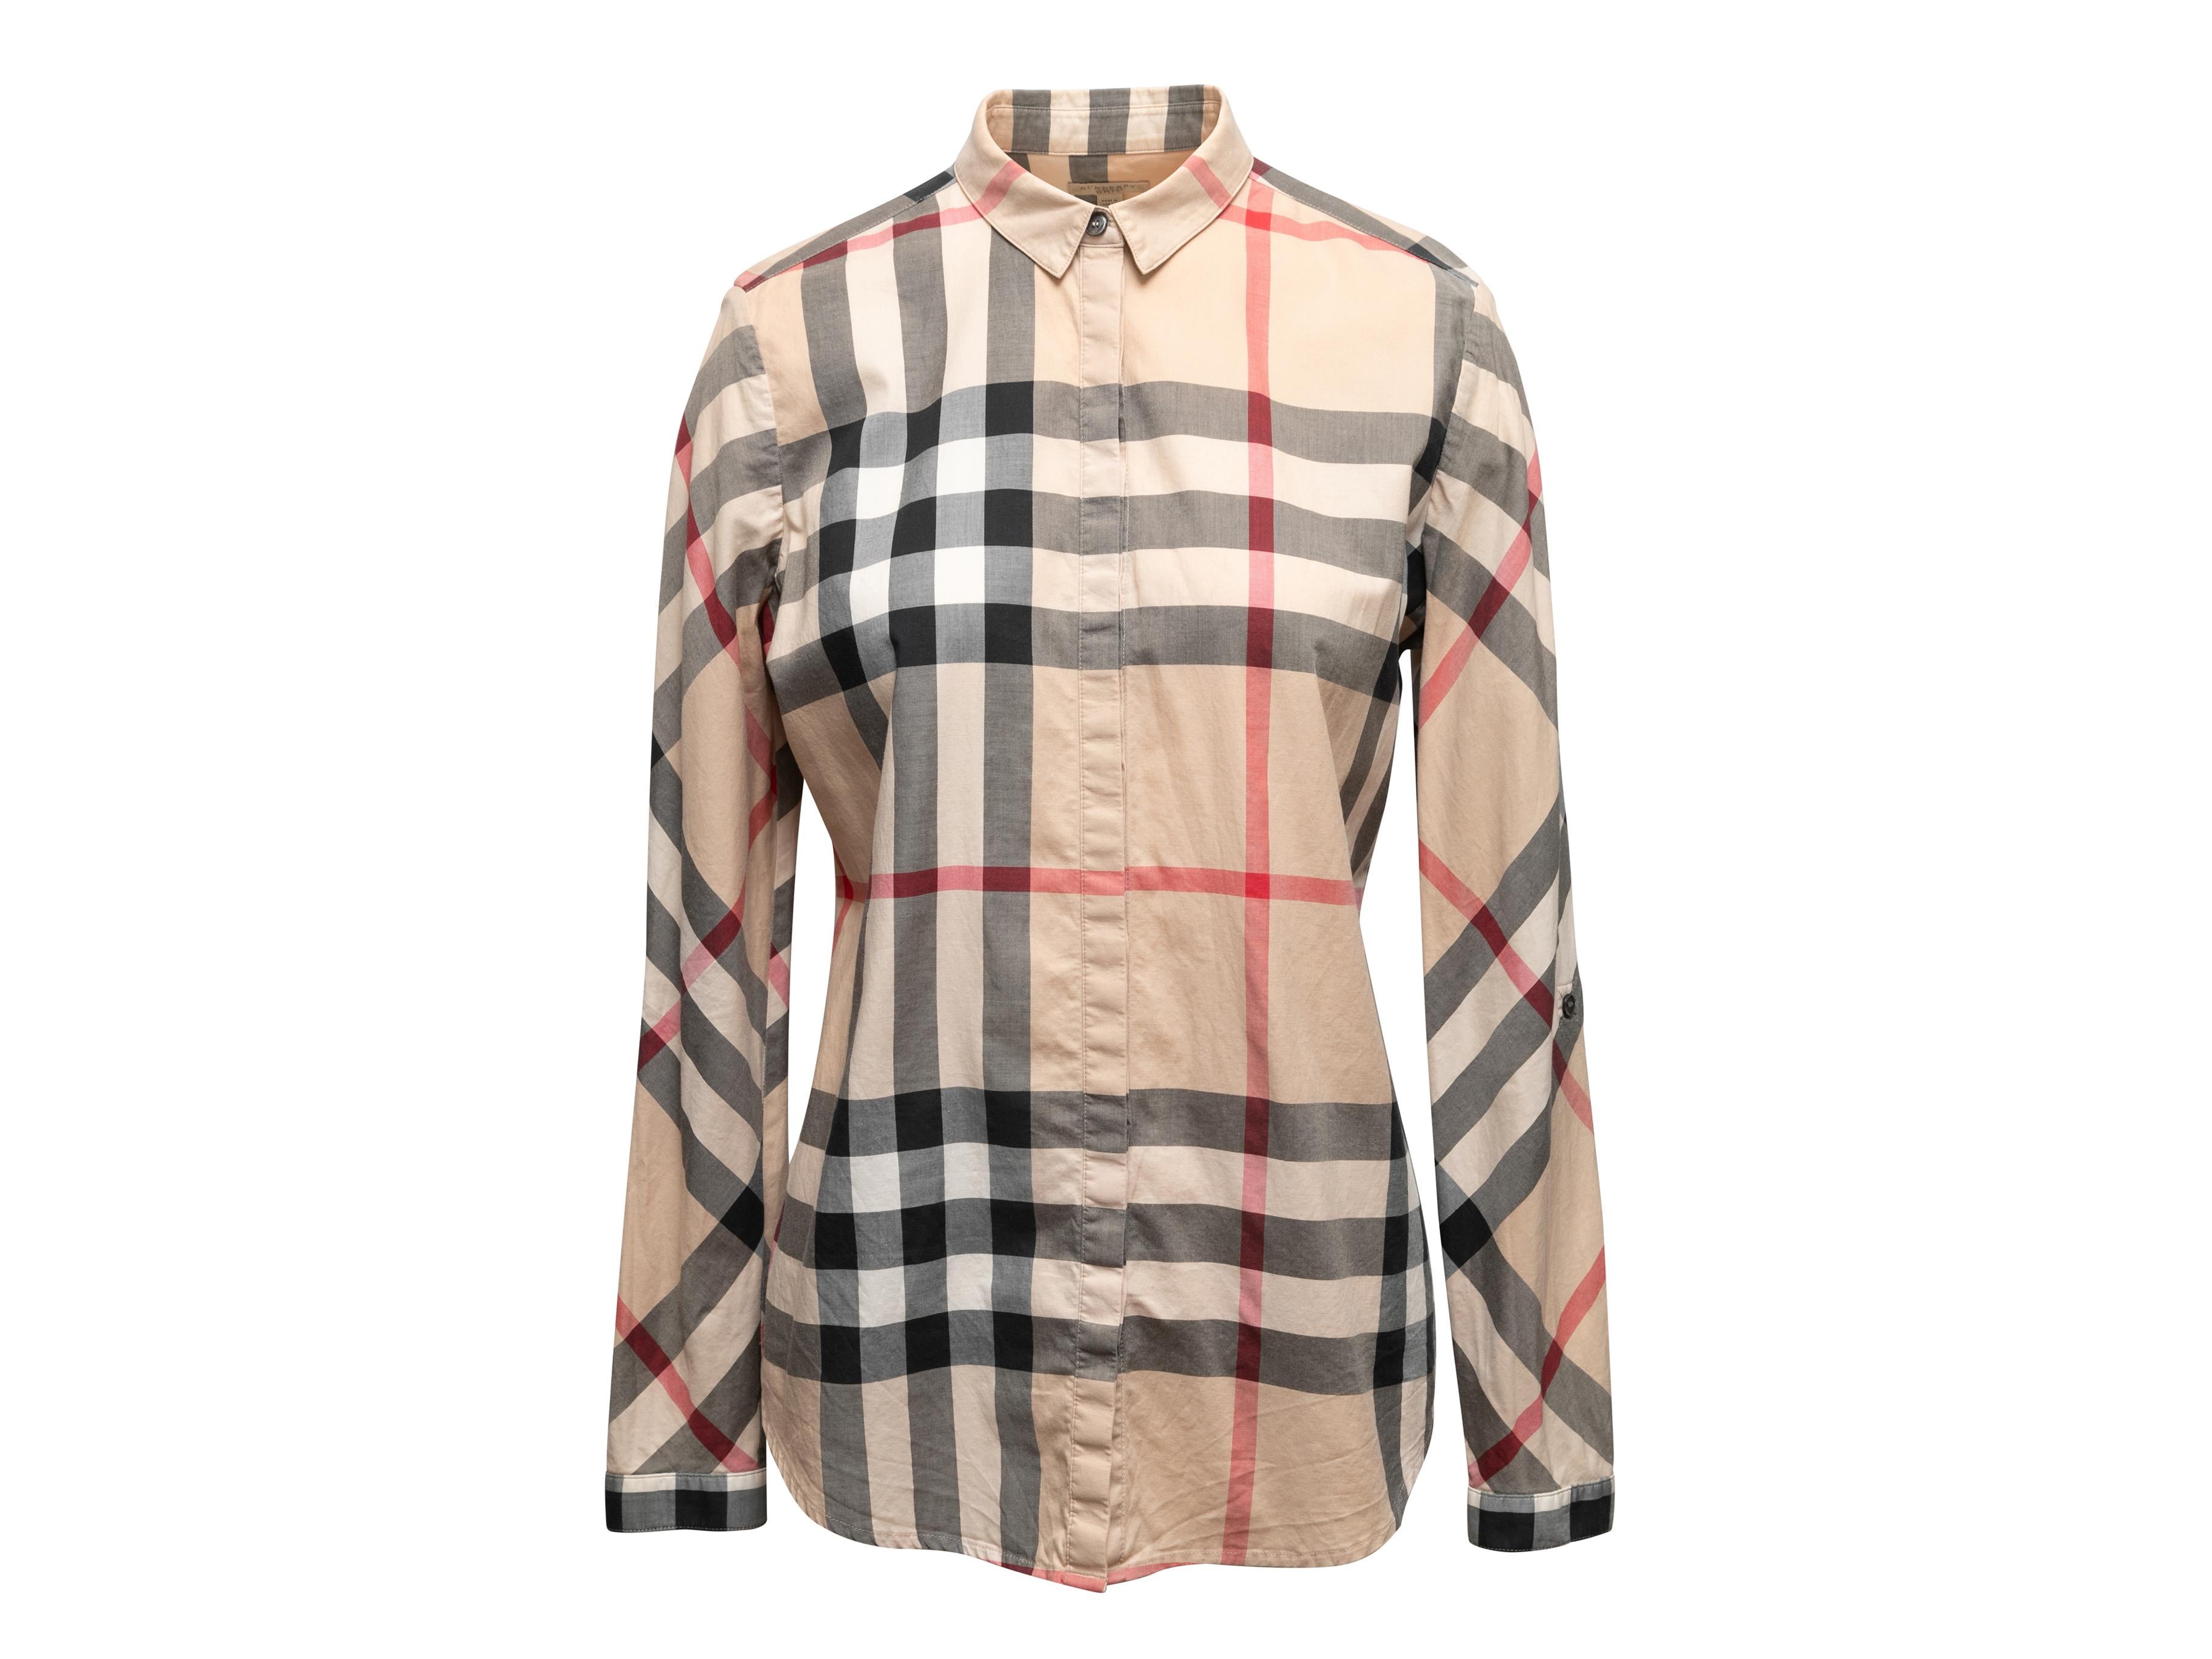 Beige and multicolor Nova Check long sleeve button-up top by Burberry Brit. Pointed collar. Button closures at center front. 40